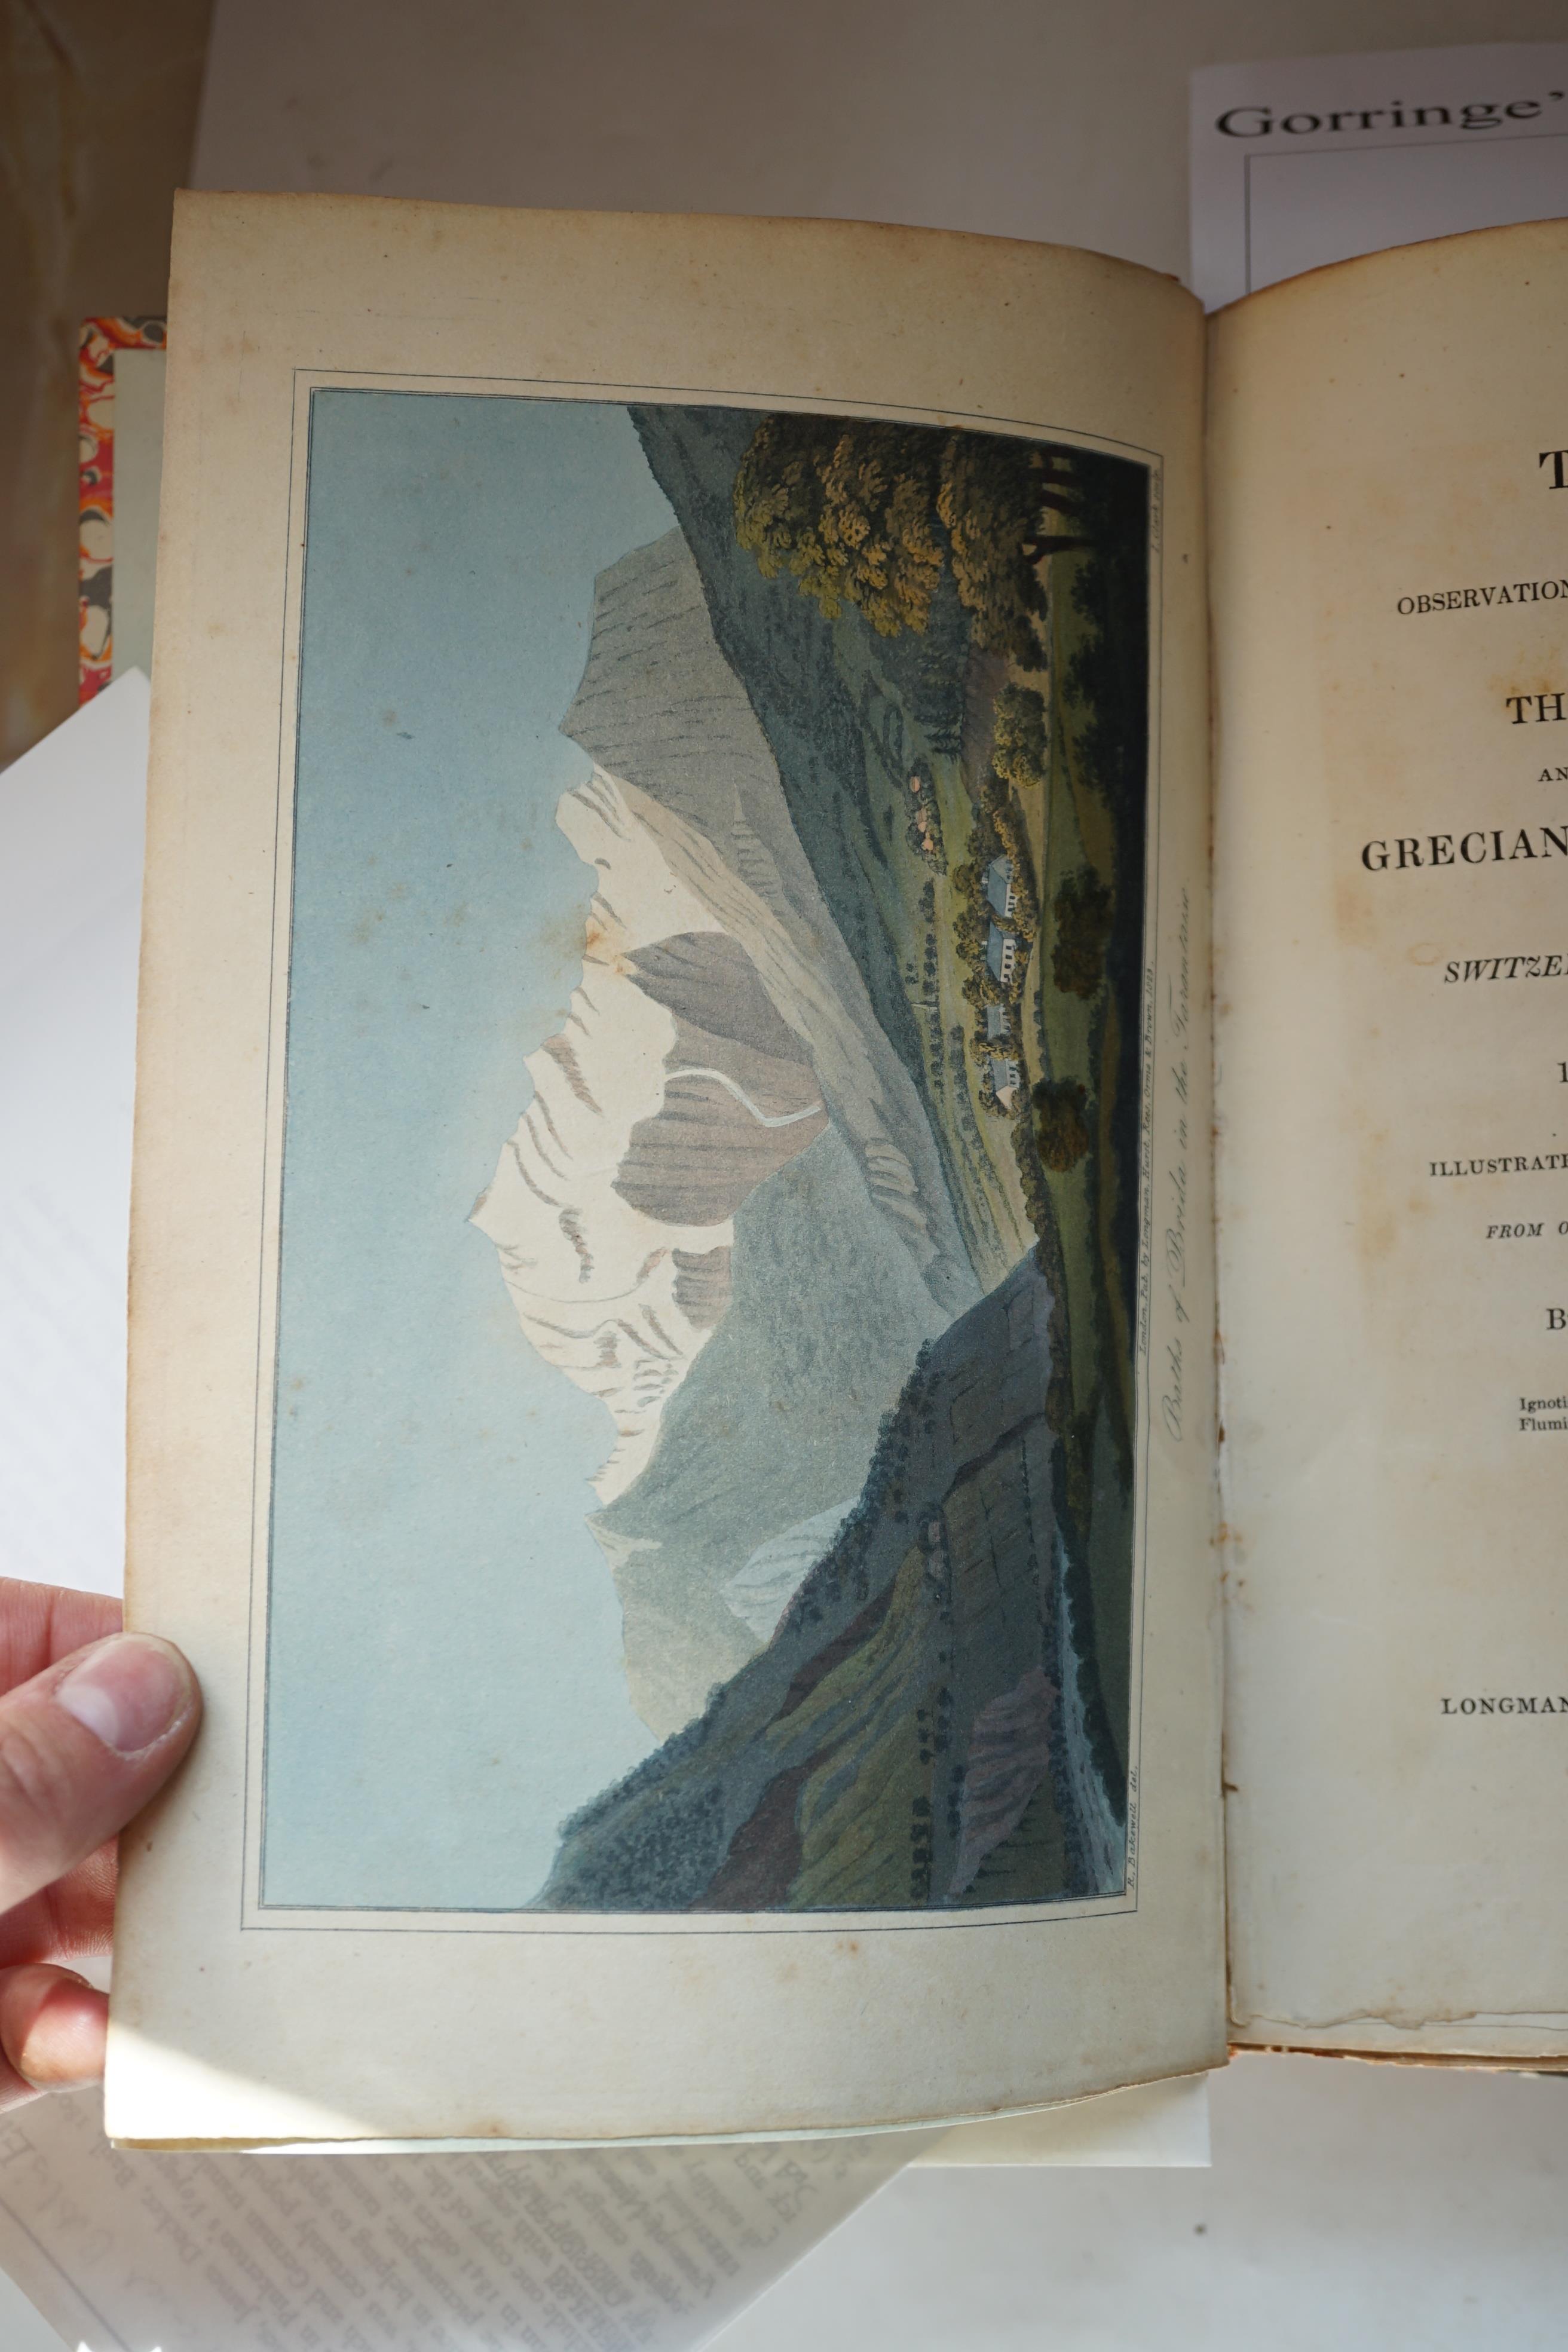 Bakewell, Robert - Travels comprising Observations made during a Residence in the Tarentaise and Various Parts of the Grecian and Penine Alps and in Switzerland and Auverge in the years 1820,1821 and 1822, 2 vols, 1st ed